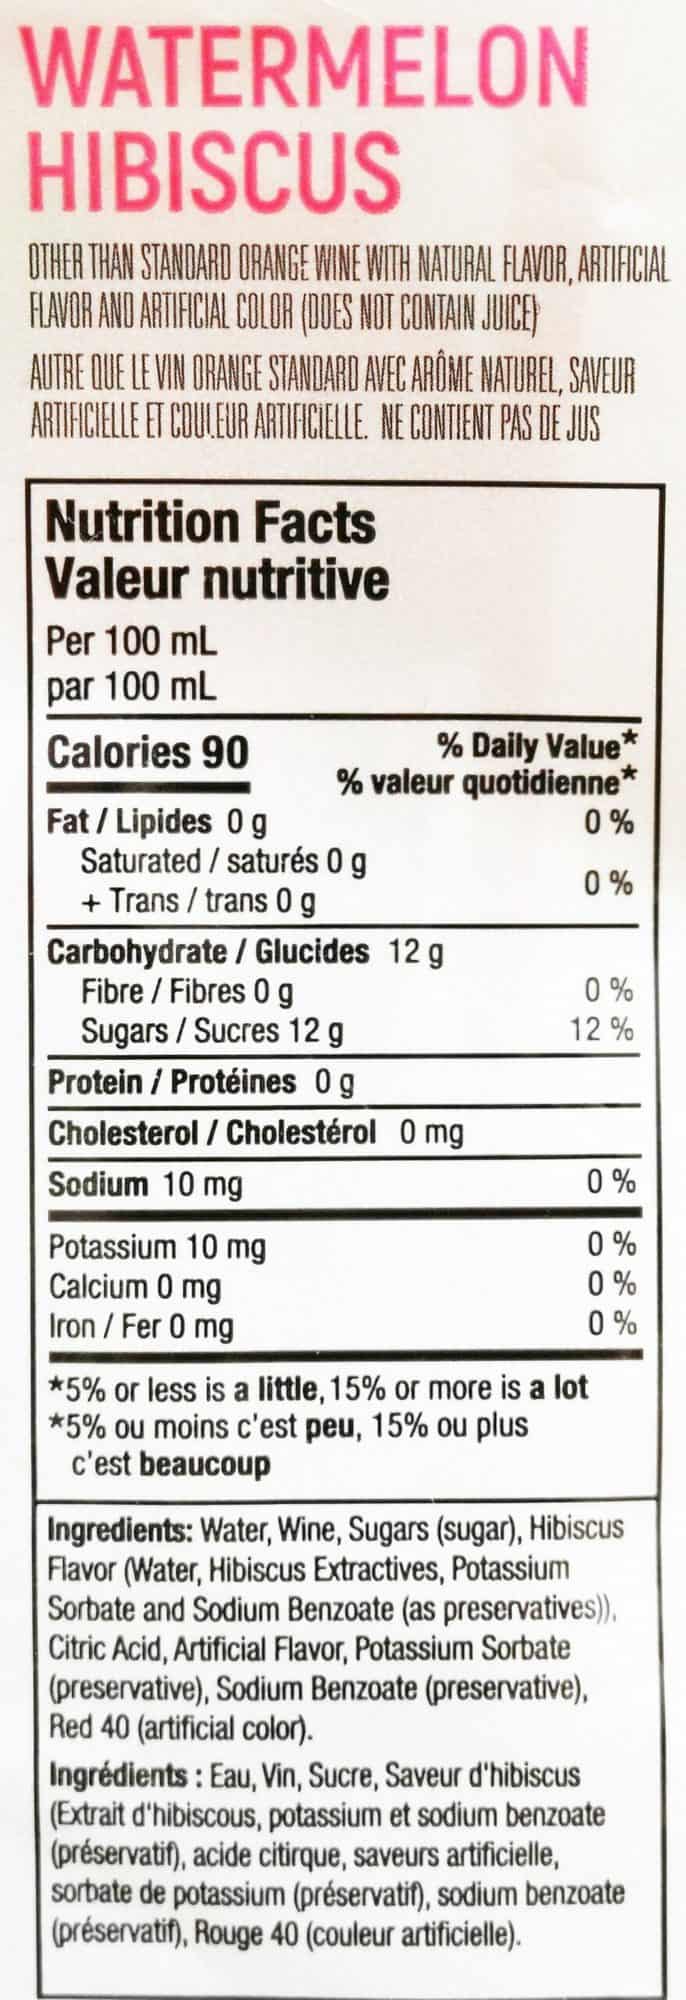 Watermelon Hibiscus nutrition facts and ingredients label. 